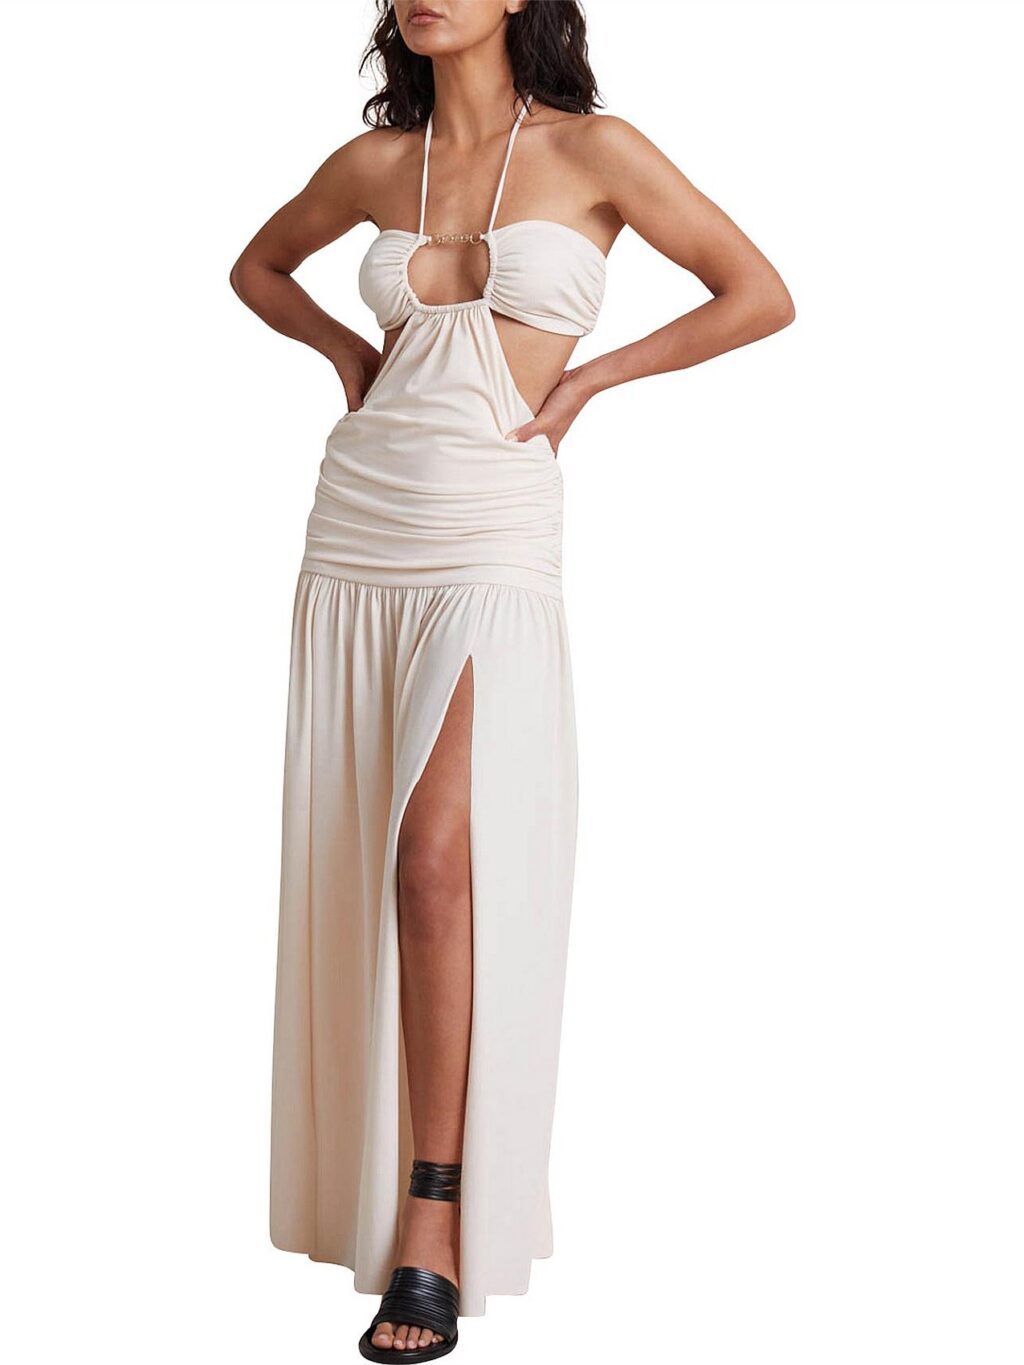 Bec and Bridge Adaline Cut Out Maxi Dress for hire.